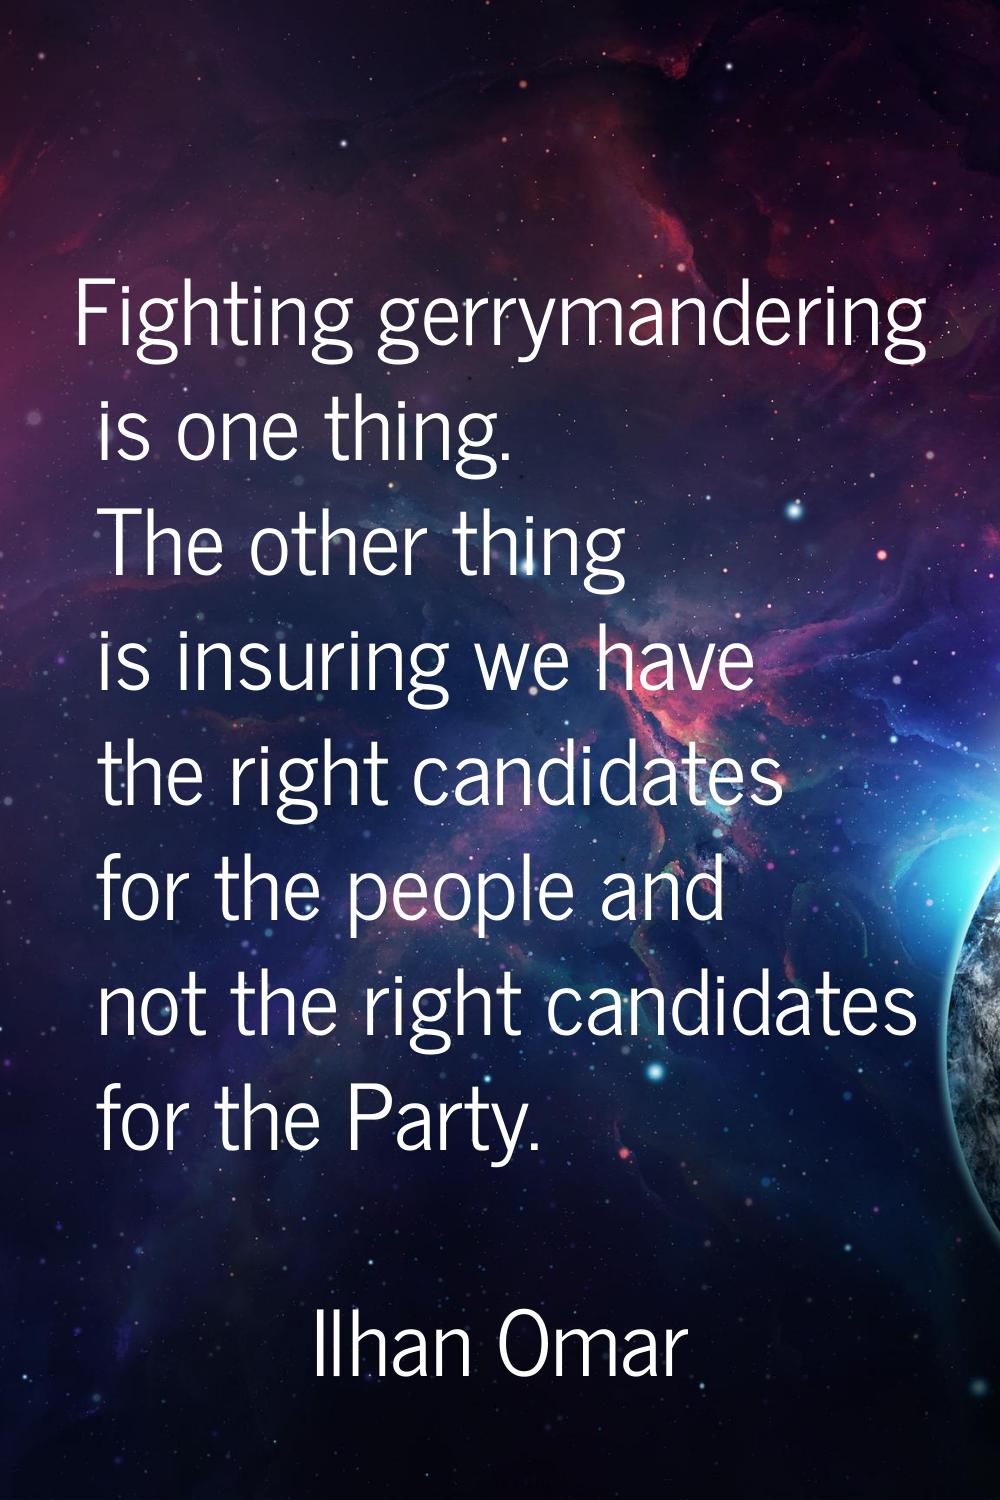 Fighting gerrymandering is one thing. The other thing is insuring we have the right candidates for 